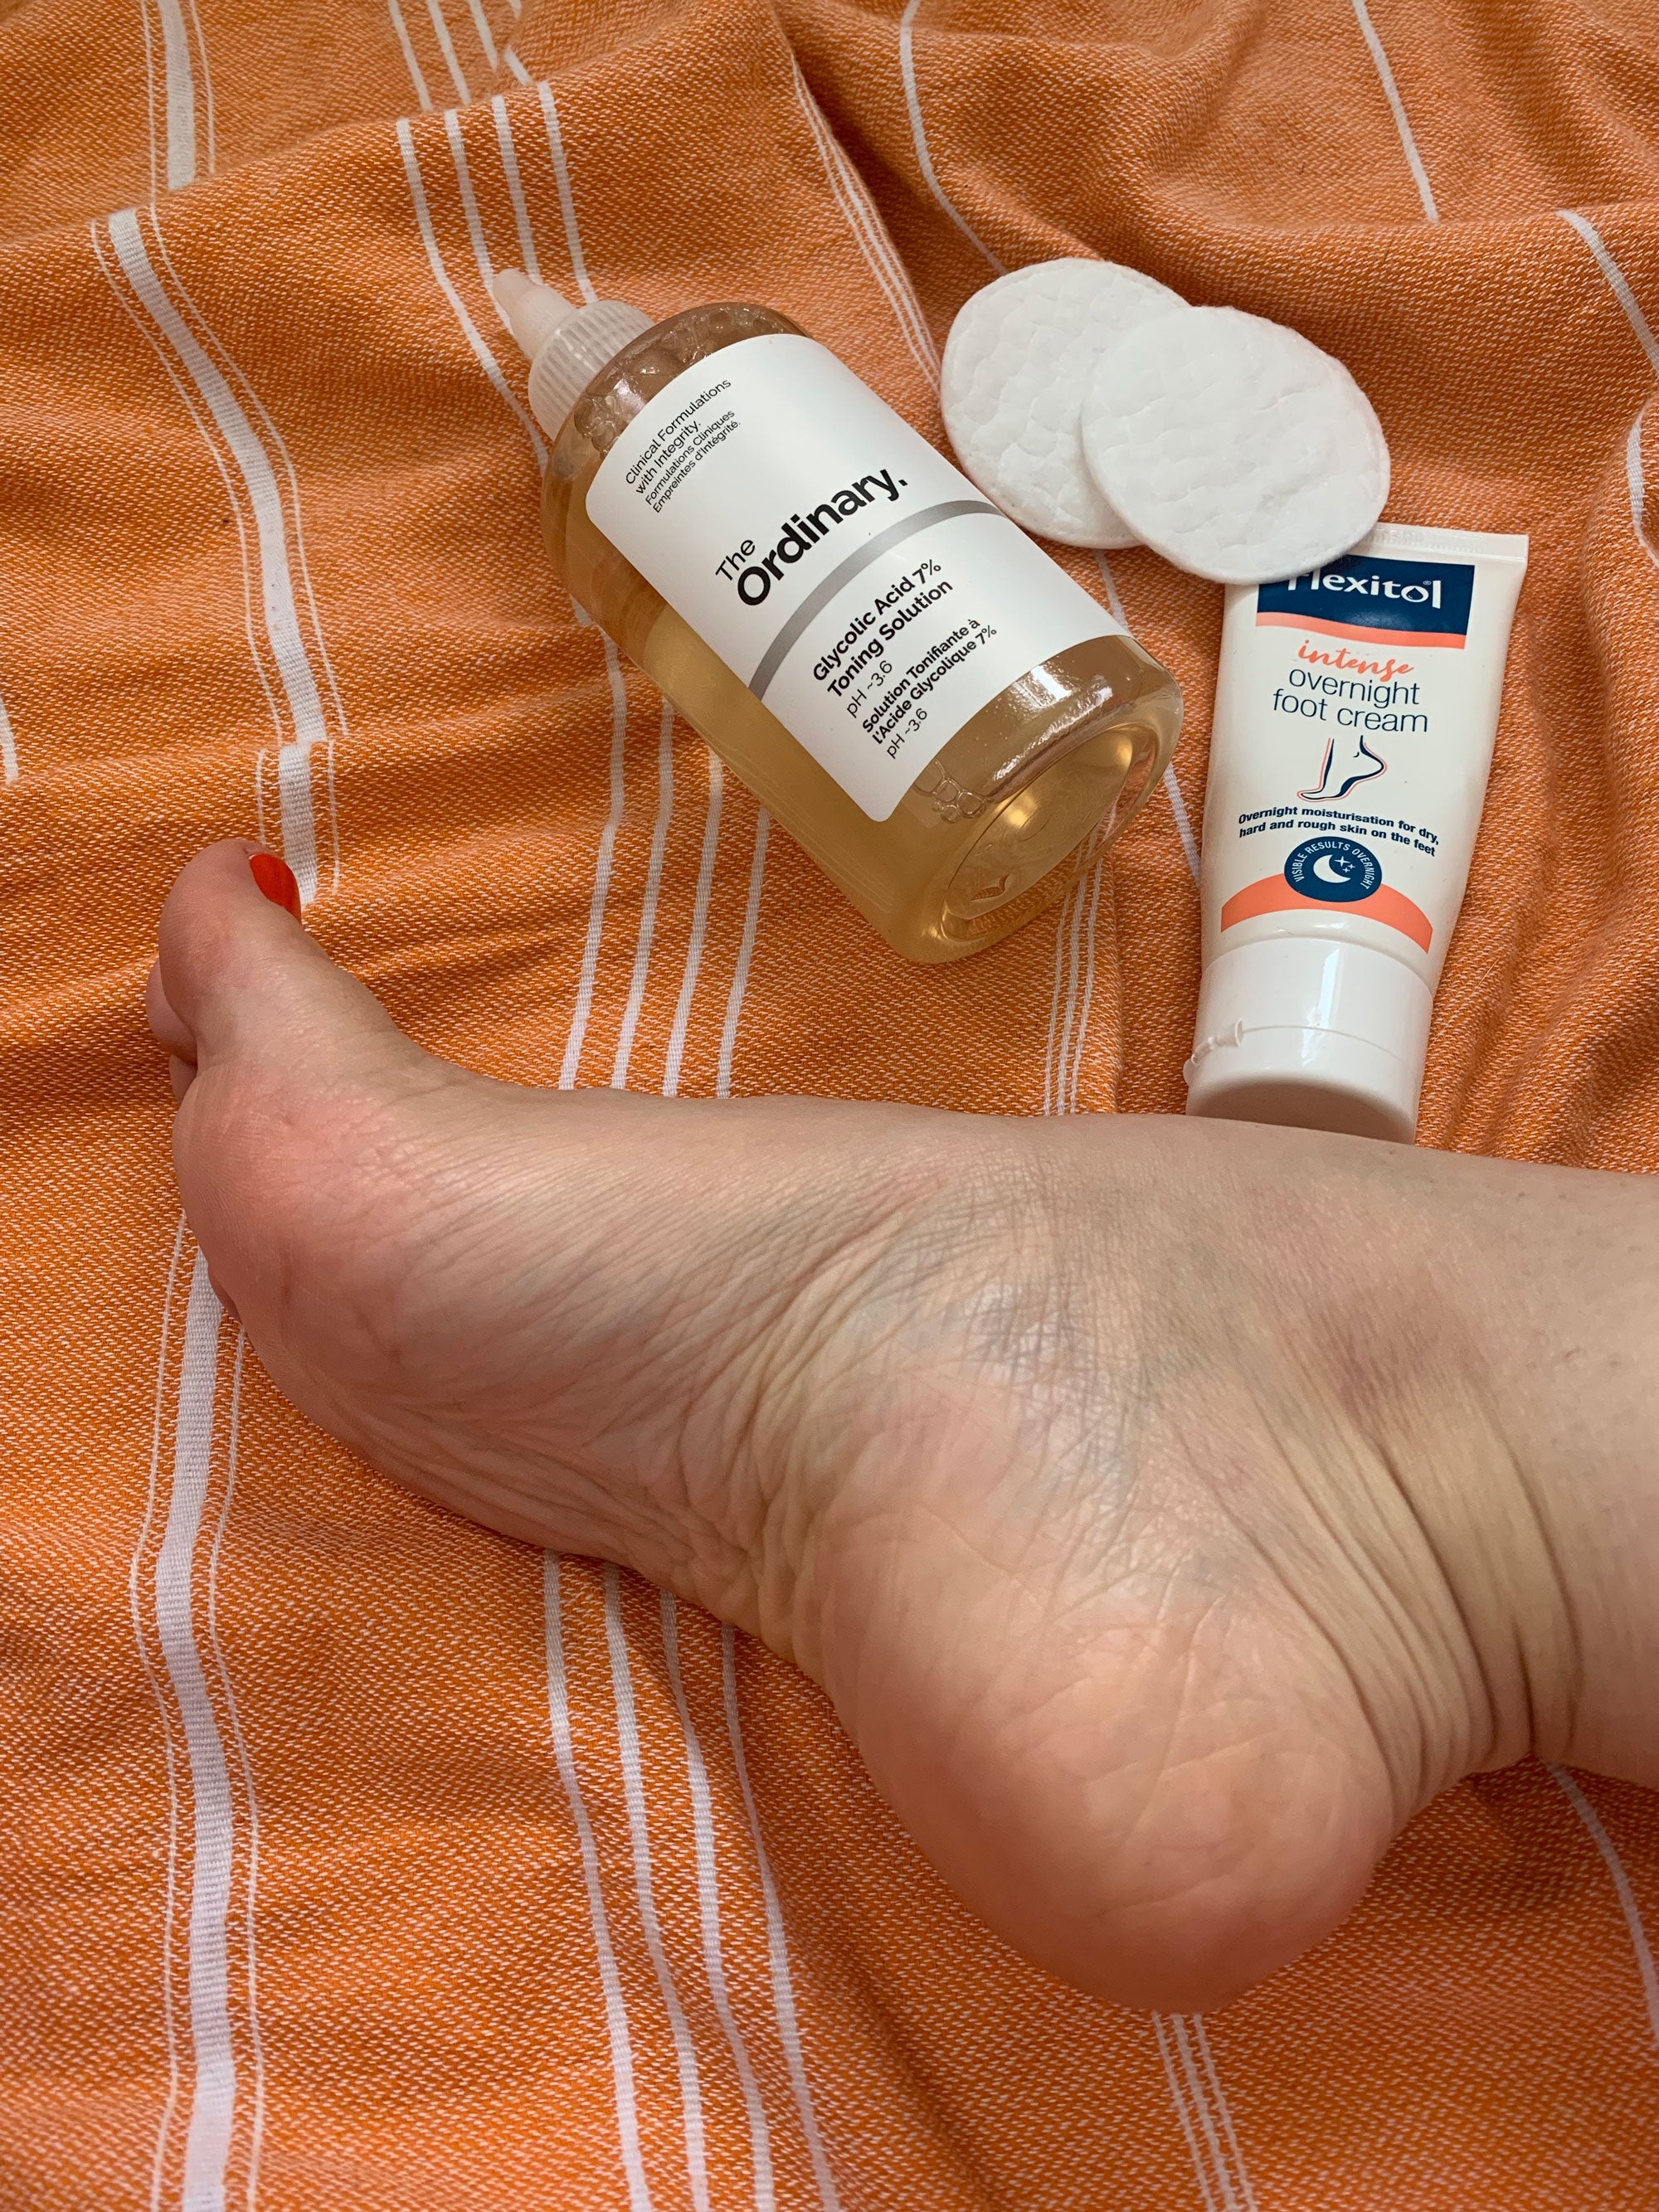 How to treat cracked heels at home without using any ointments - Quora